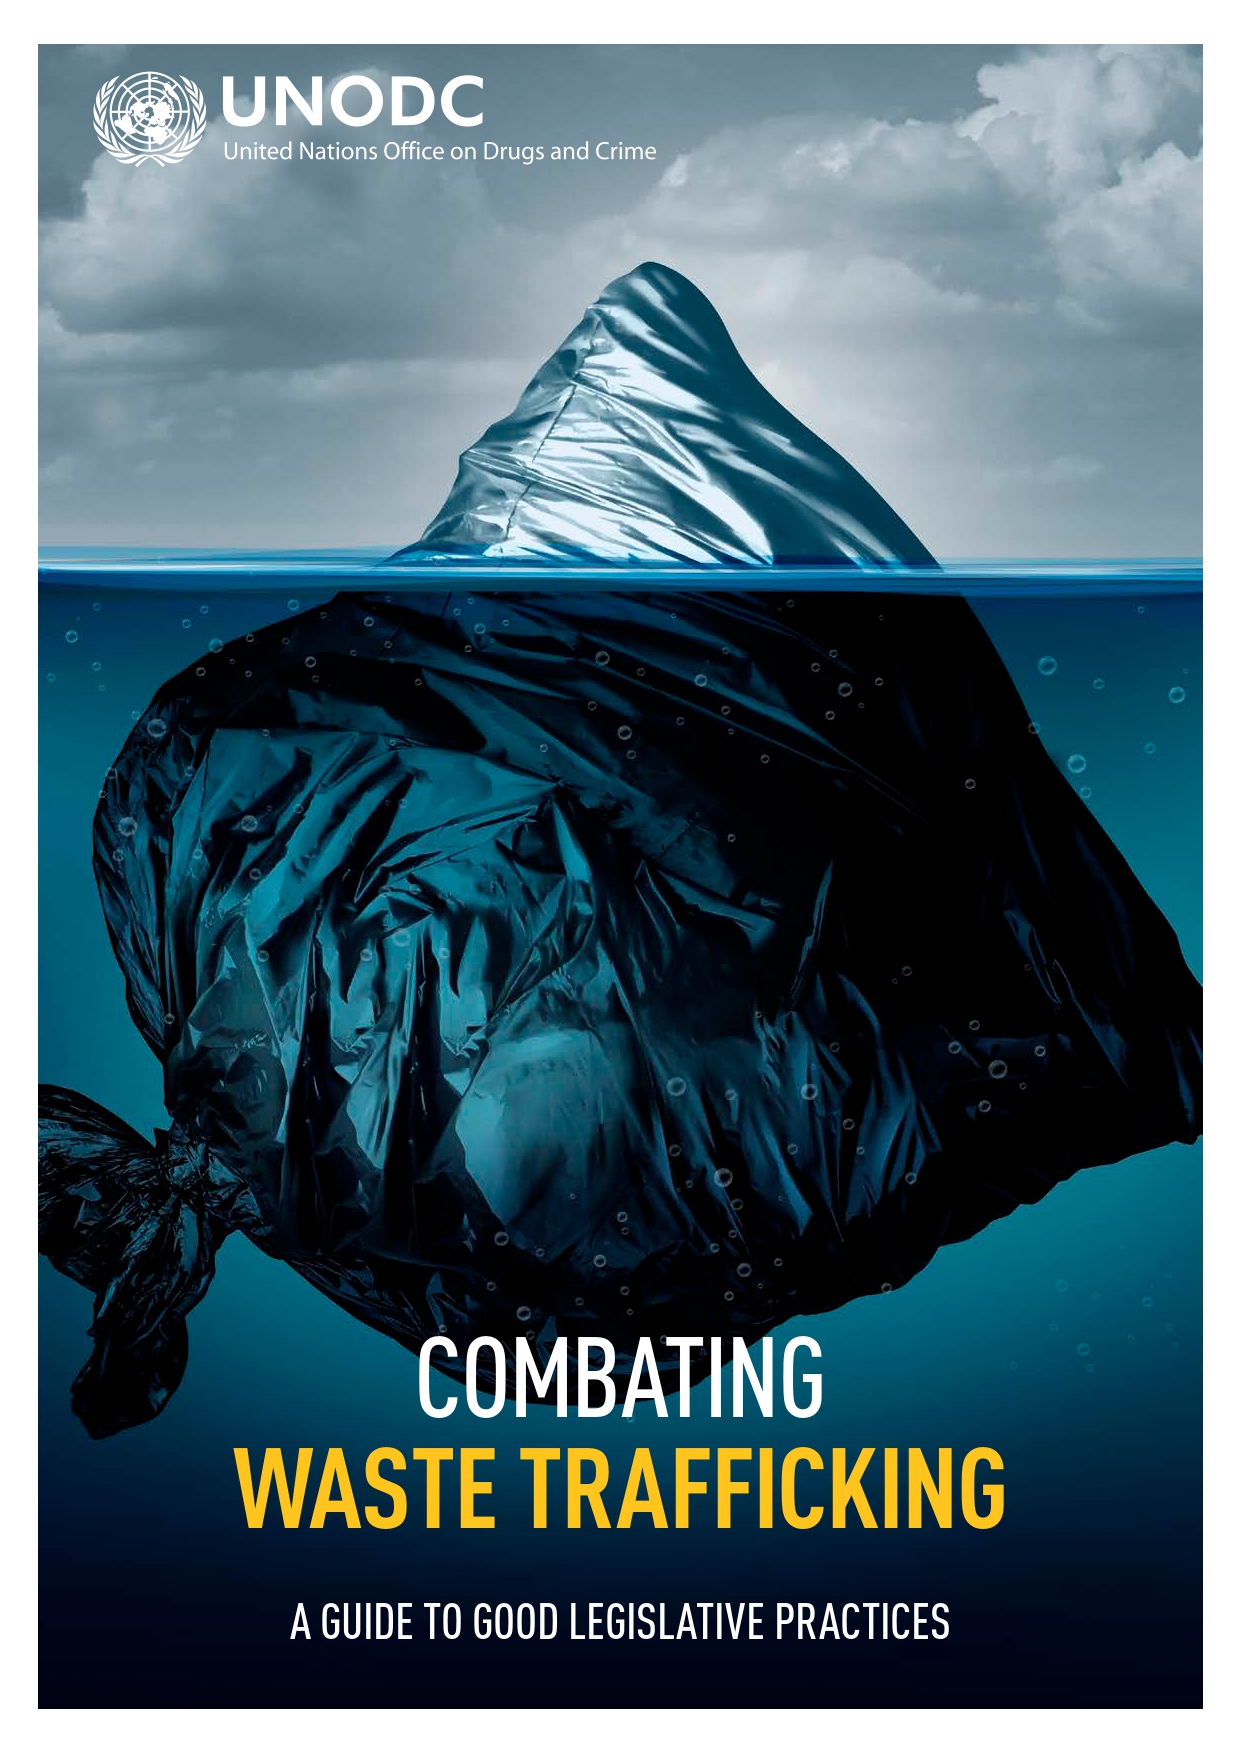 Cover page of the UNODC publication “Combating Waste Trafficking – A Guide to Good Legislative Practices”. 